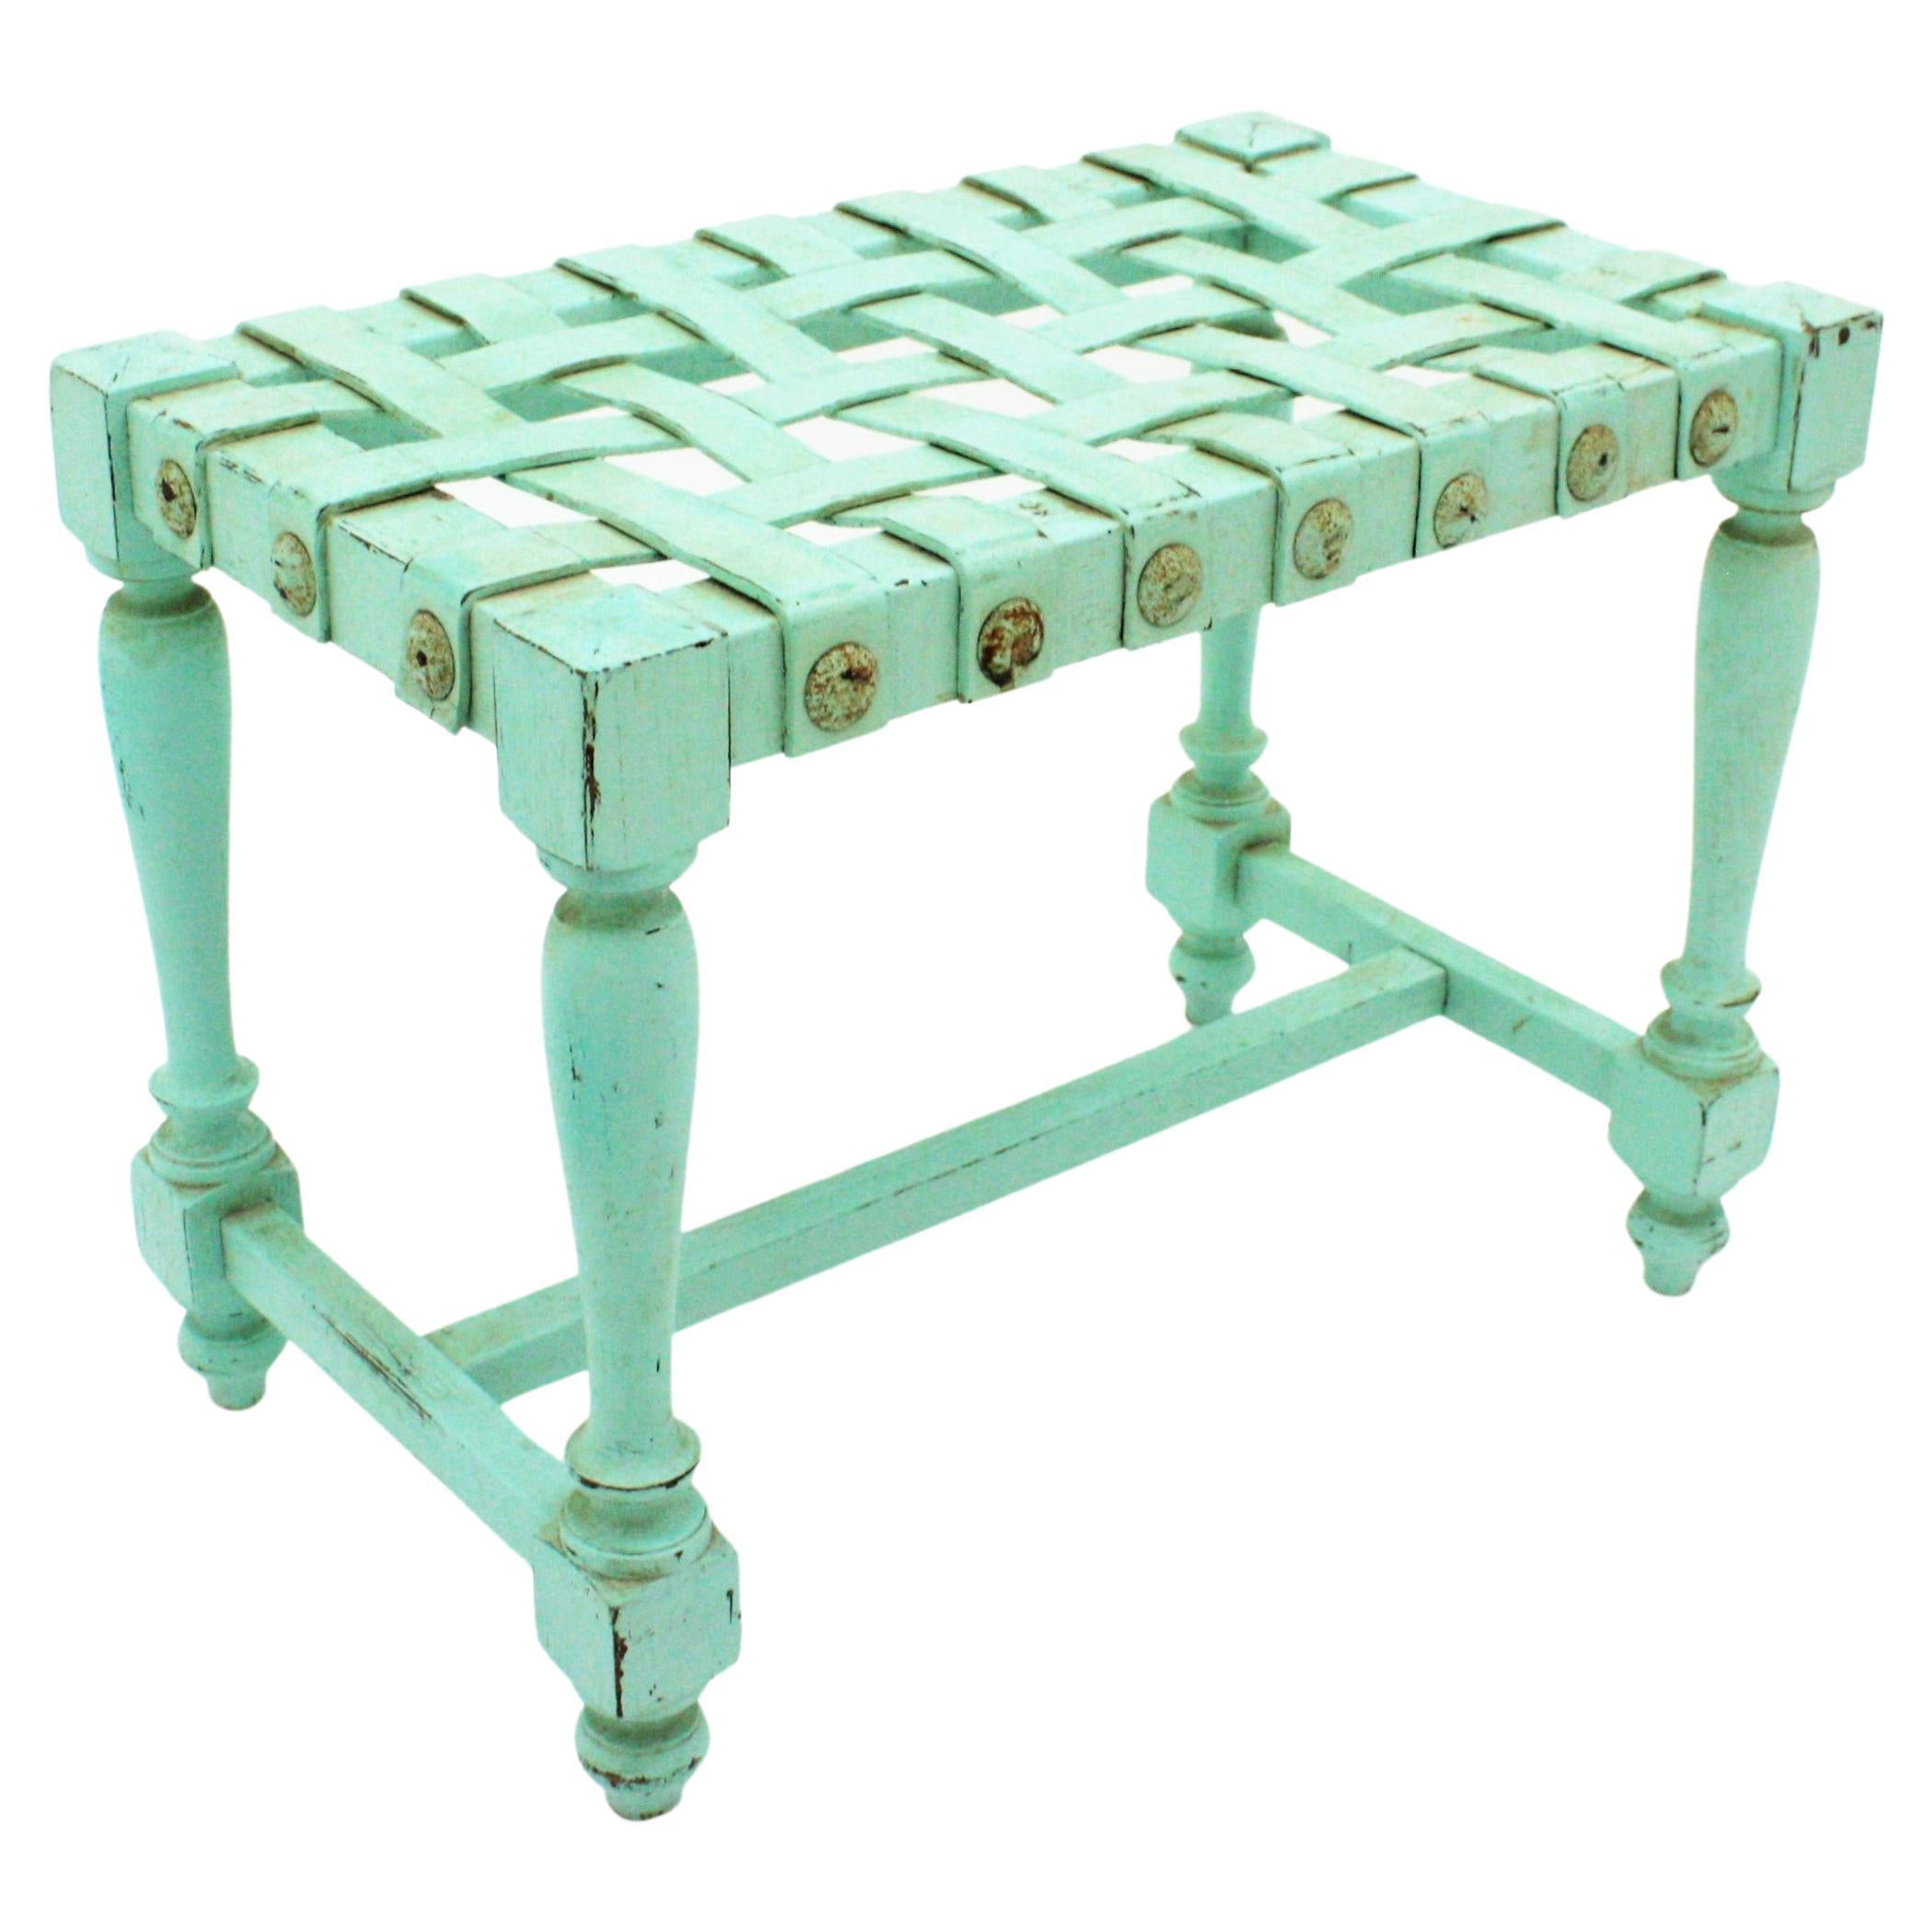 Spanish Stool in Turquoise Patinated Oak Wook with Woven Leather Seat